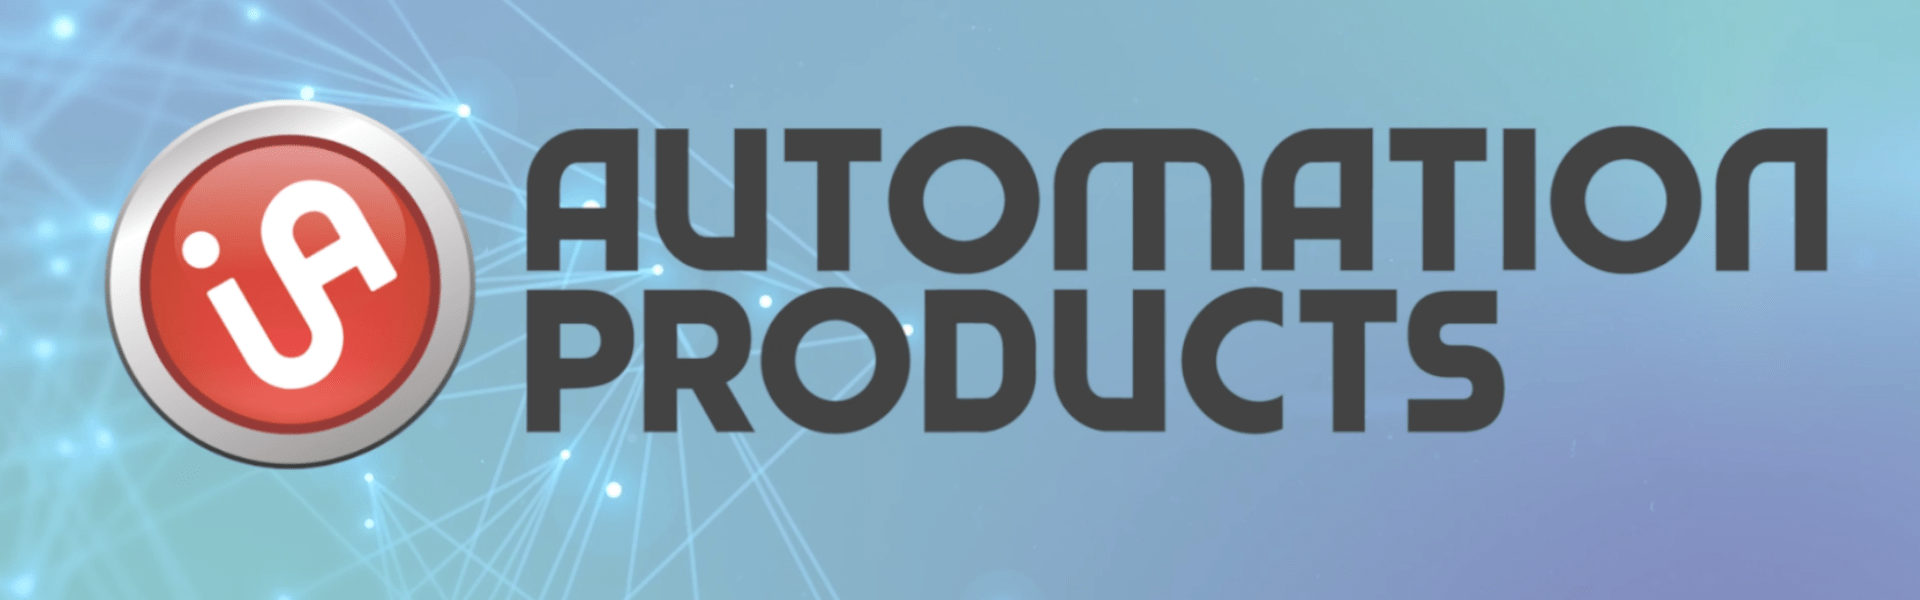 Introducing Automation Products